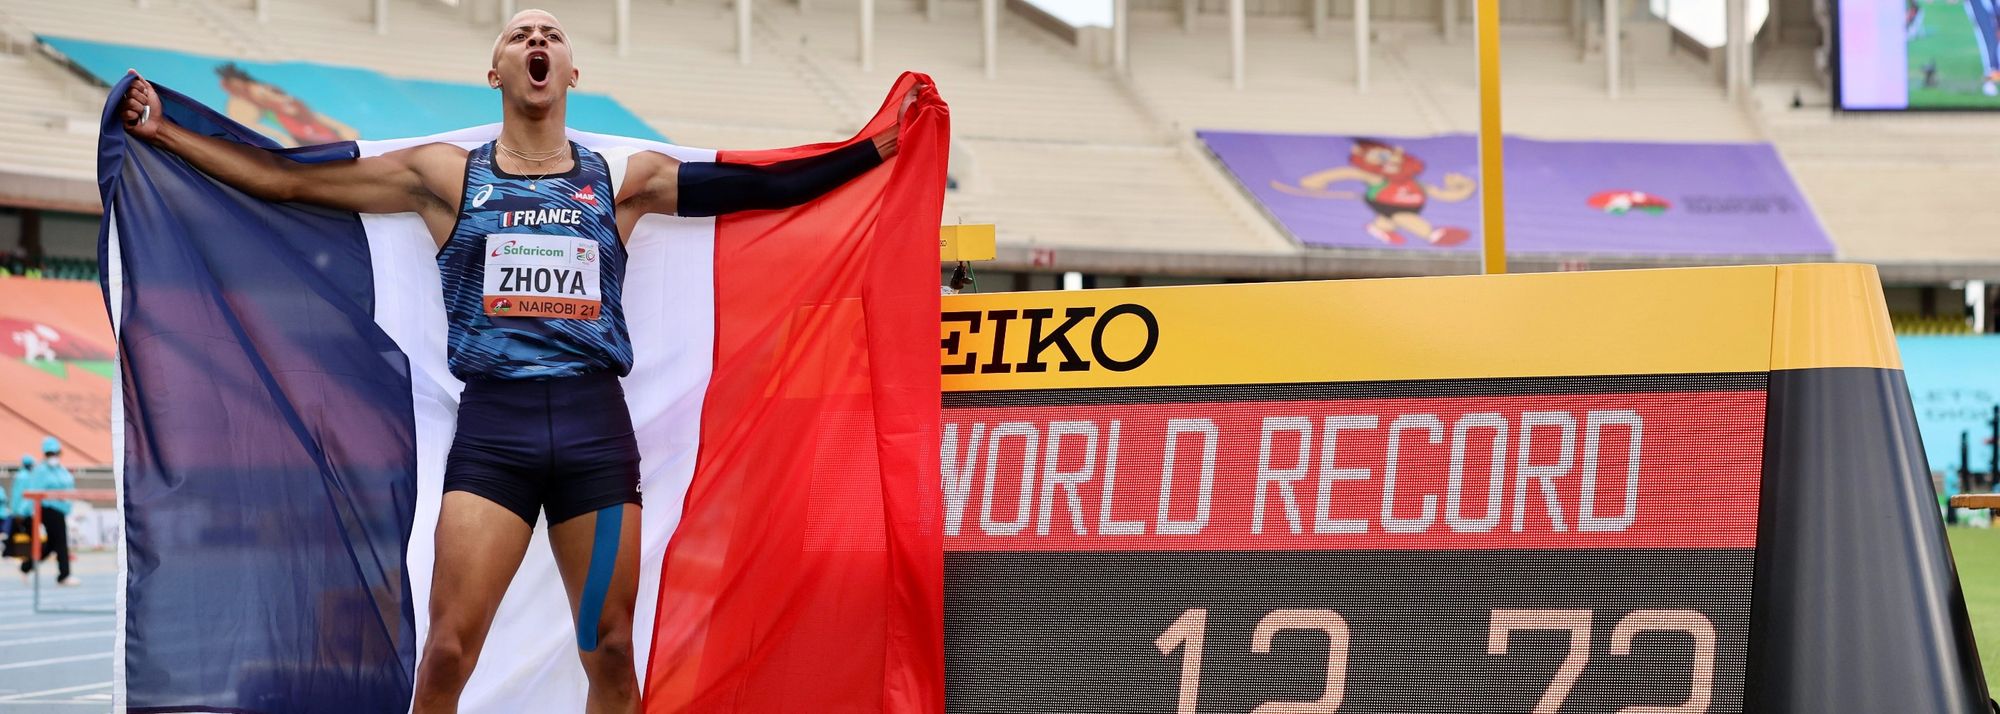 If anyone thought Sasha Zhoya’s record-breaking feat on Friday in the 110m hurdles semifinals was a fluke, the European U20 champion cleared all doubts when he totally obliterated the world record he had set barely 24 hours before.